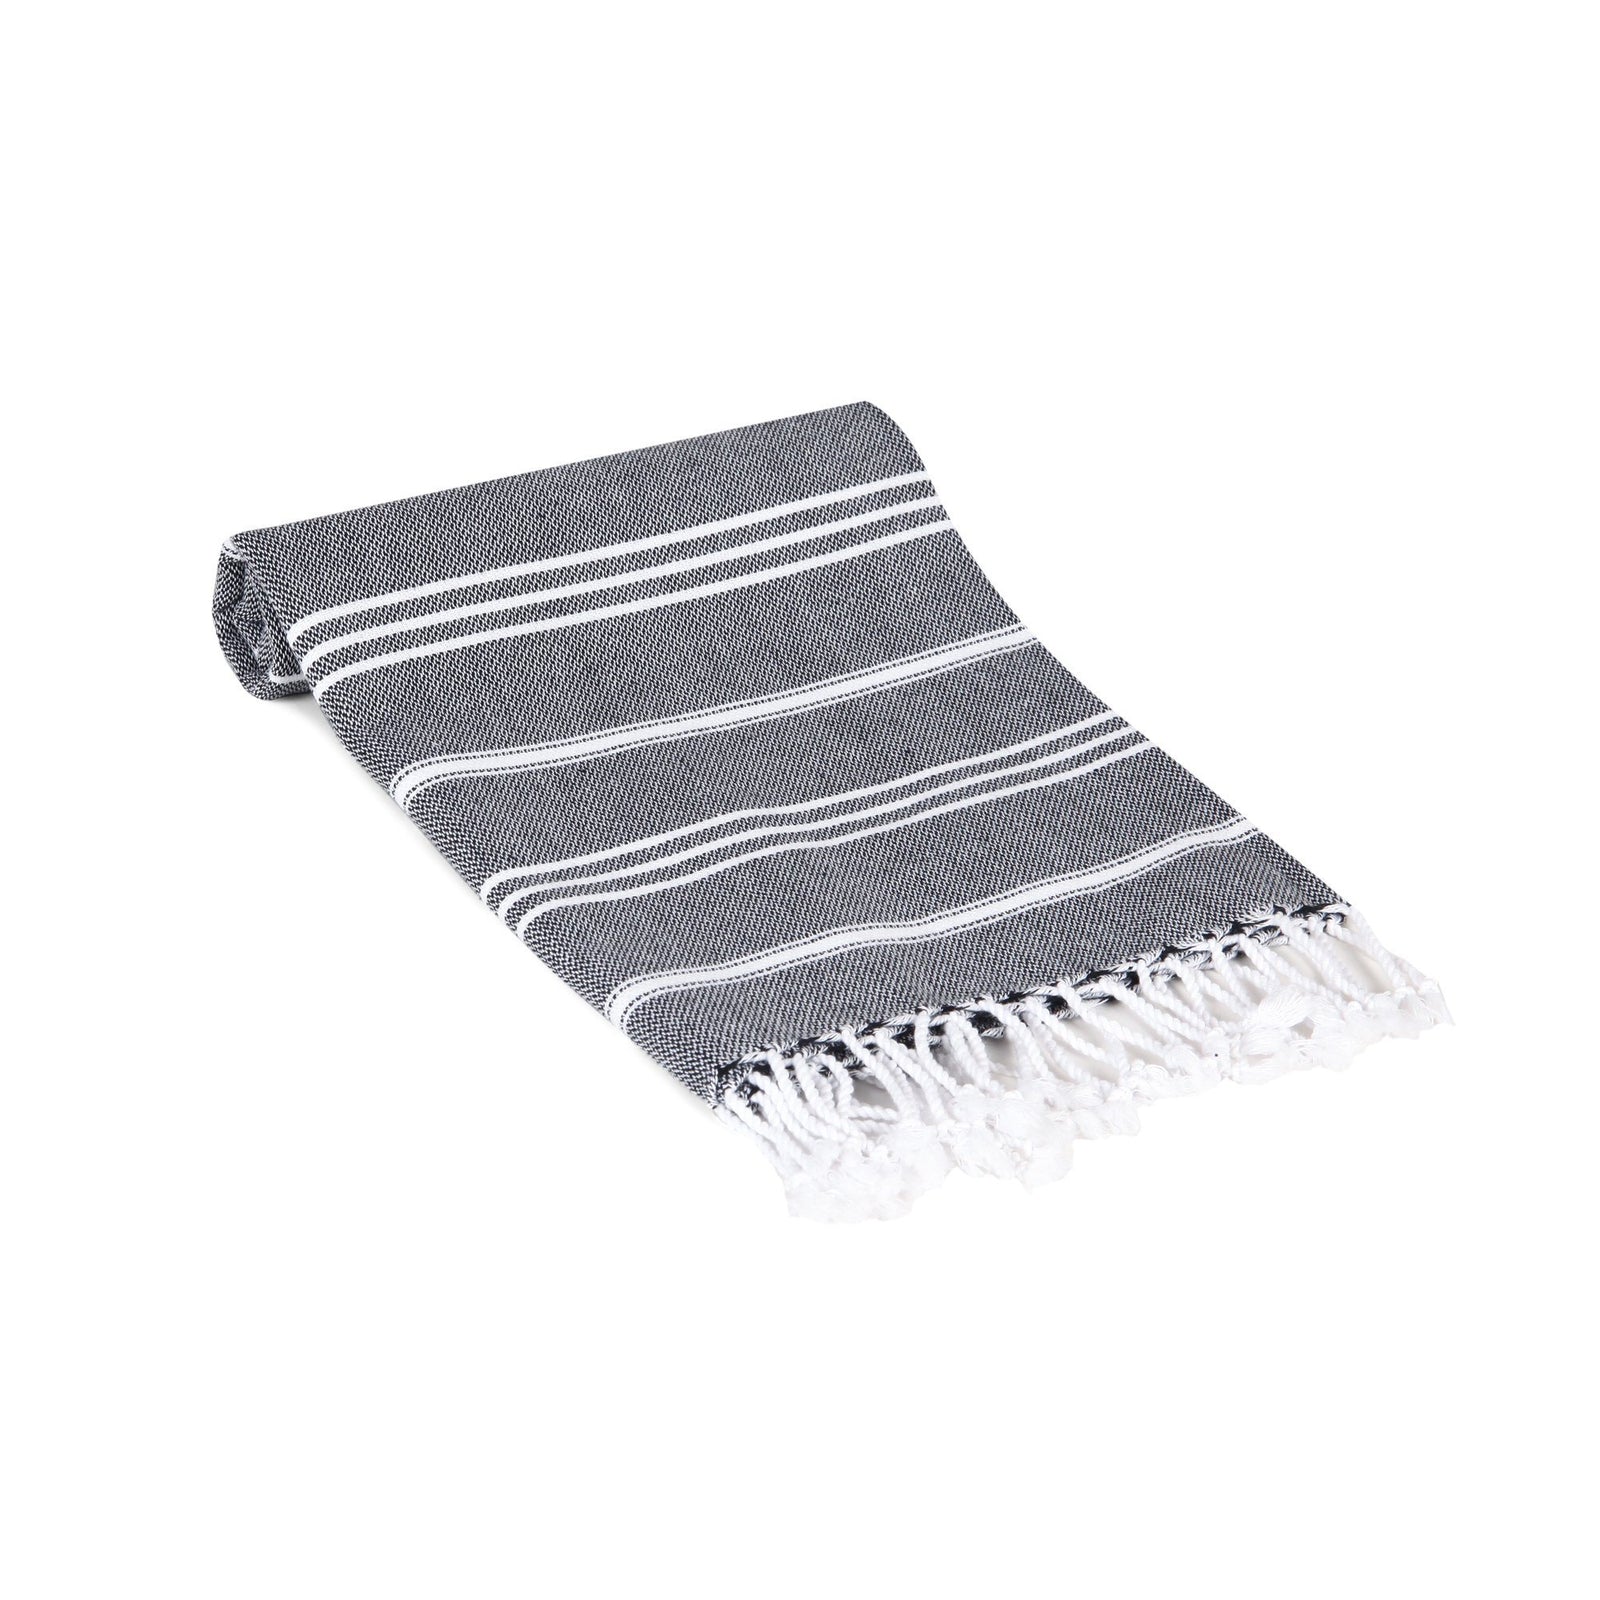 O&O by Olivia & Oliver™ Turkish Modal Hand Towel in White - Deal4deals